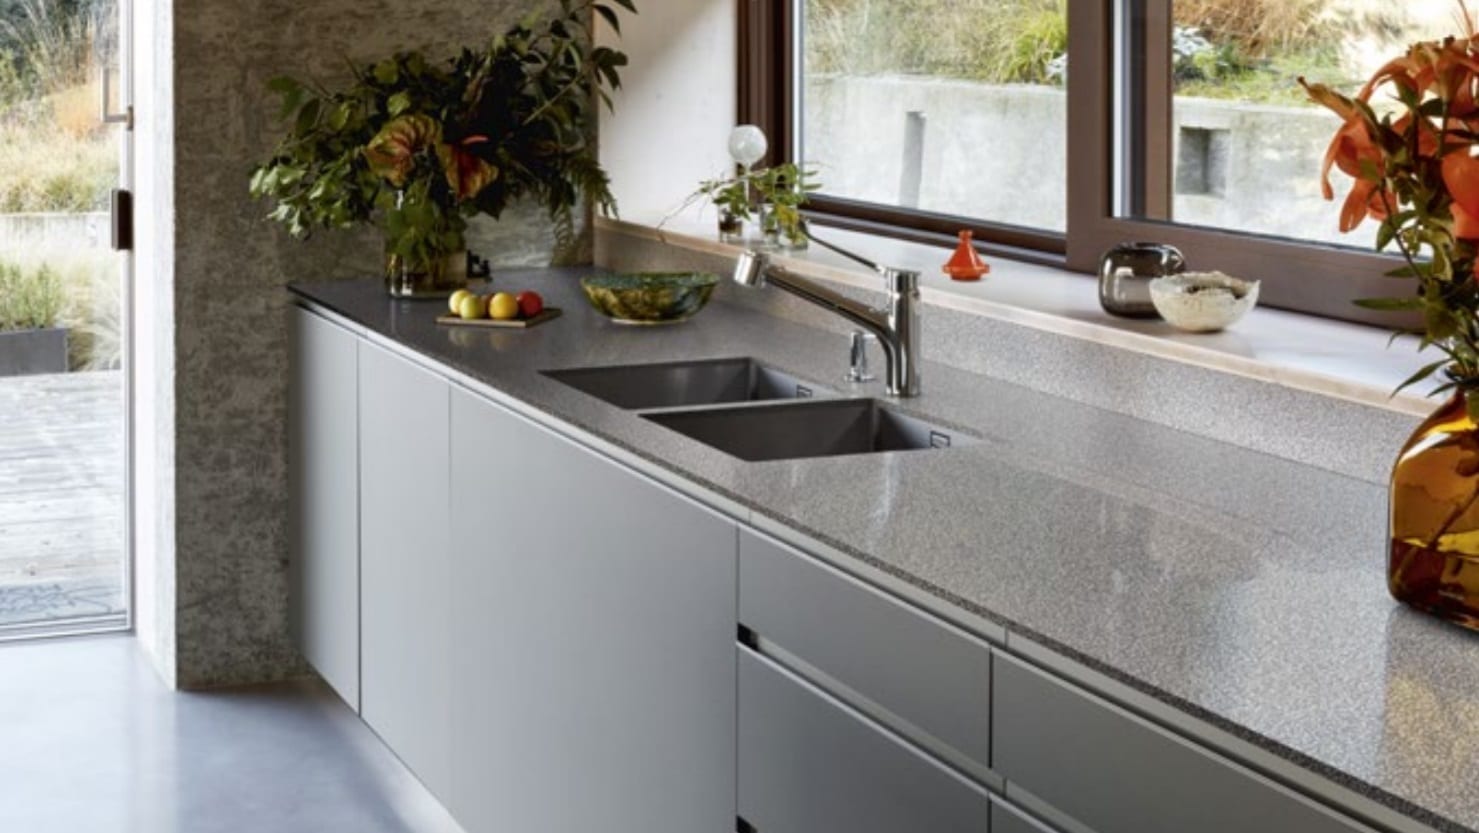 What Kitchen Worktops We Use To Make Our Bespoke Kitchen Furniture